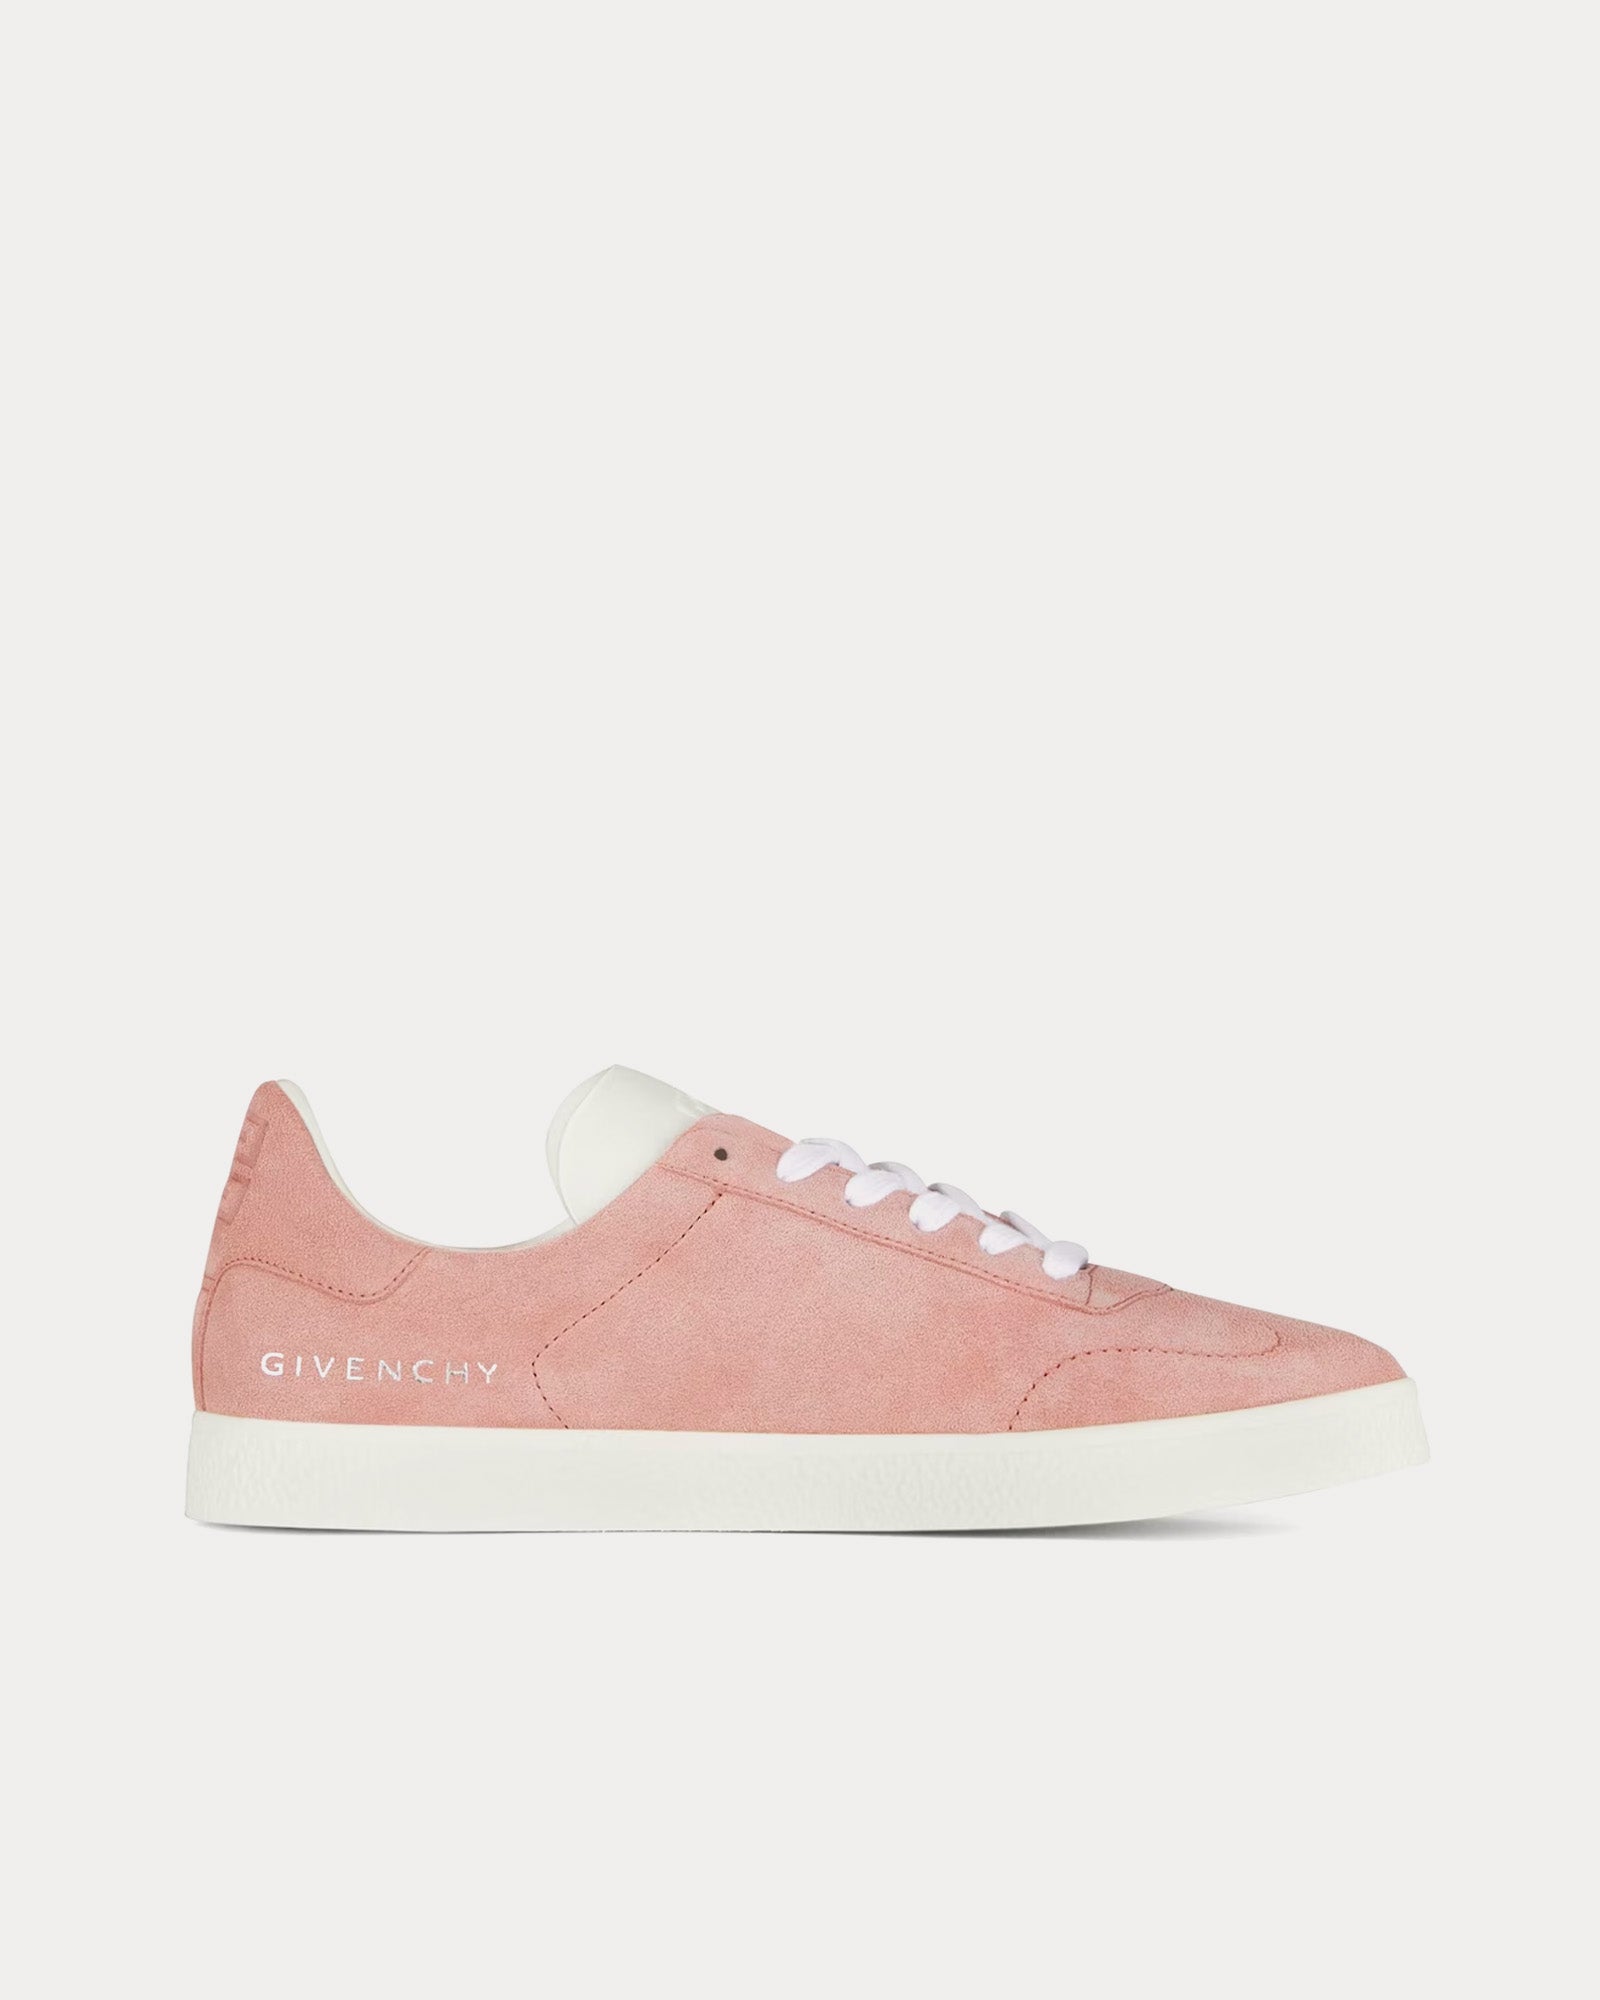 Givenchy - Town Suede Old Pink Low Top Sneakers